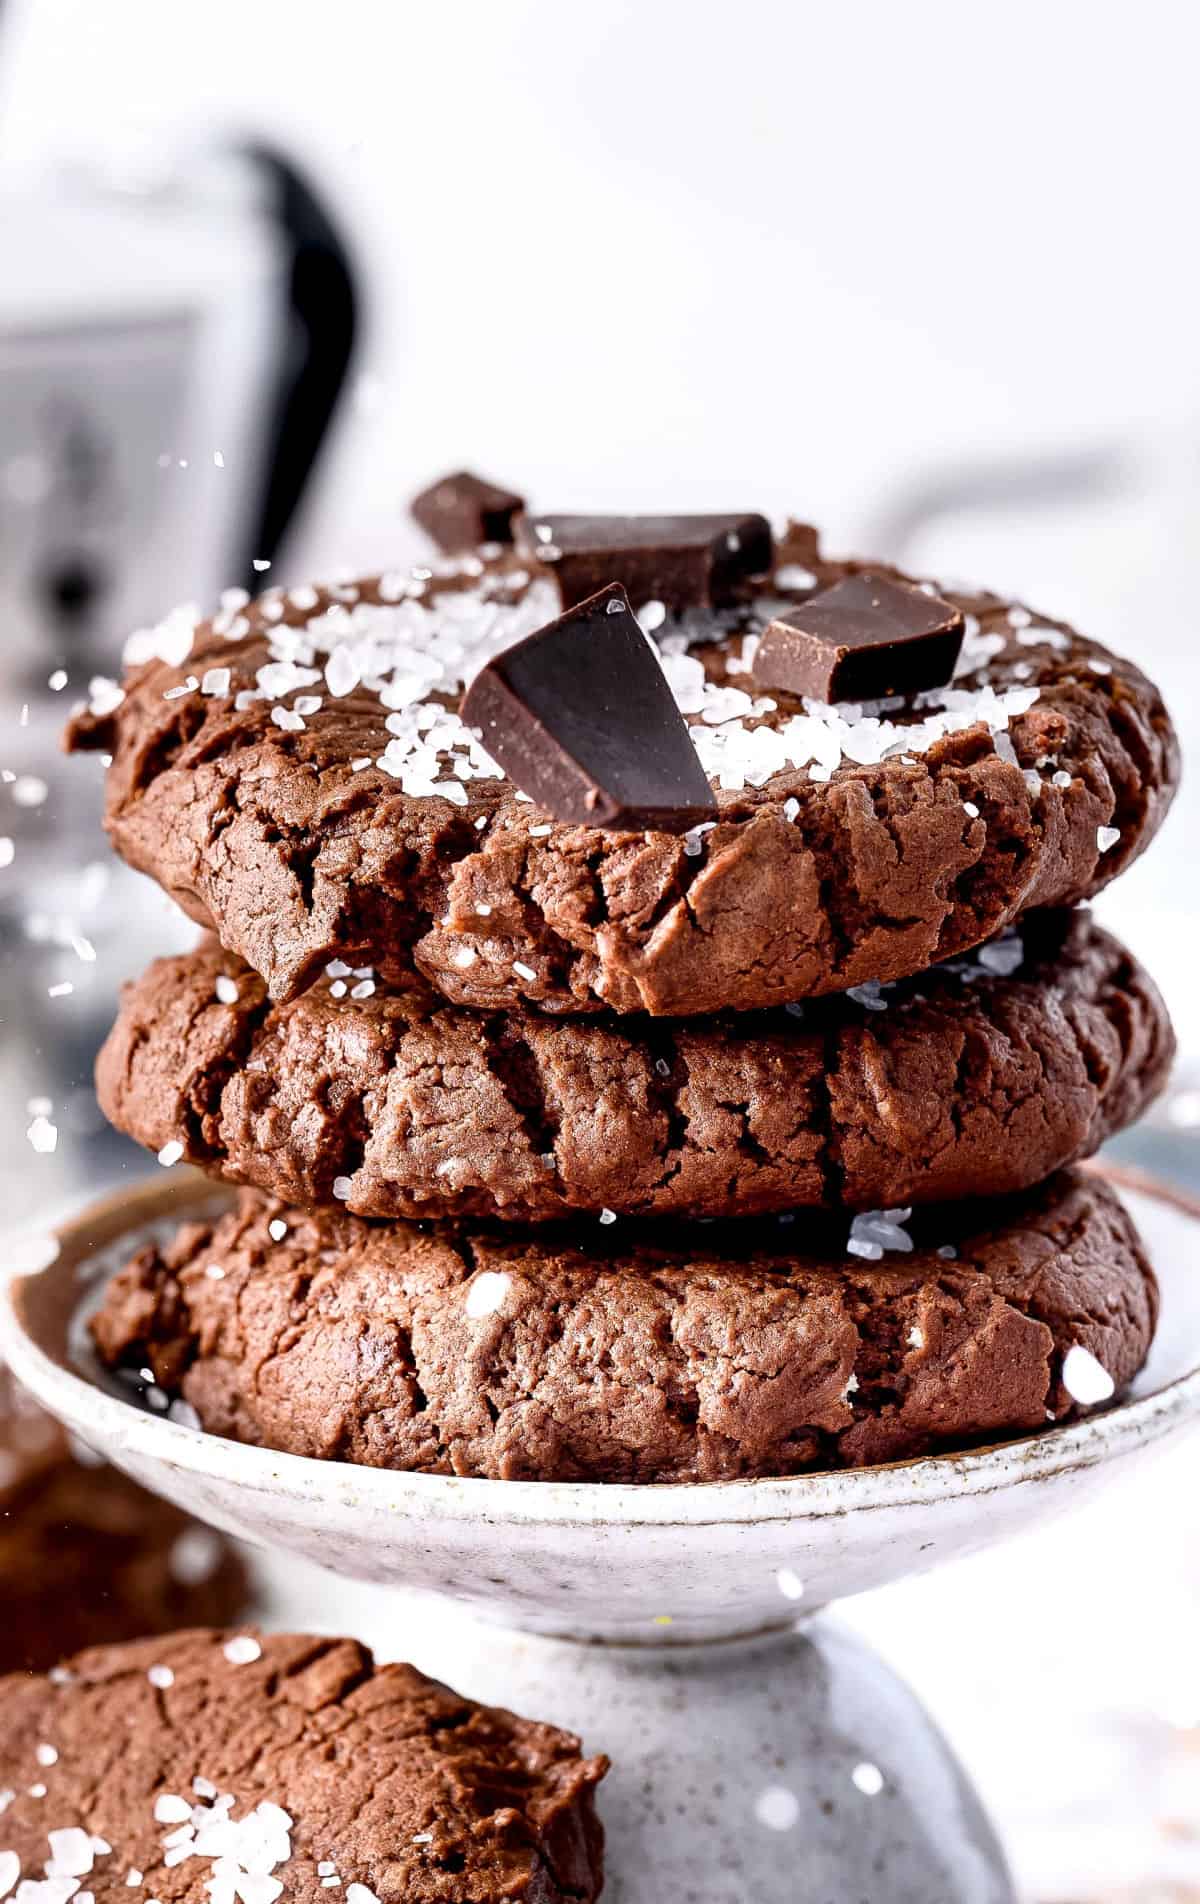 Three chocolate cookies stacked on top of each other with seal salt and chocolate chunks on top.